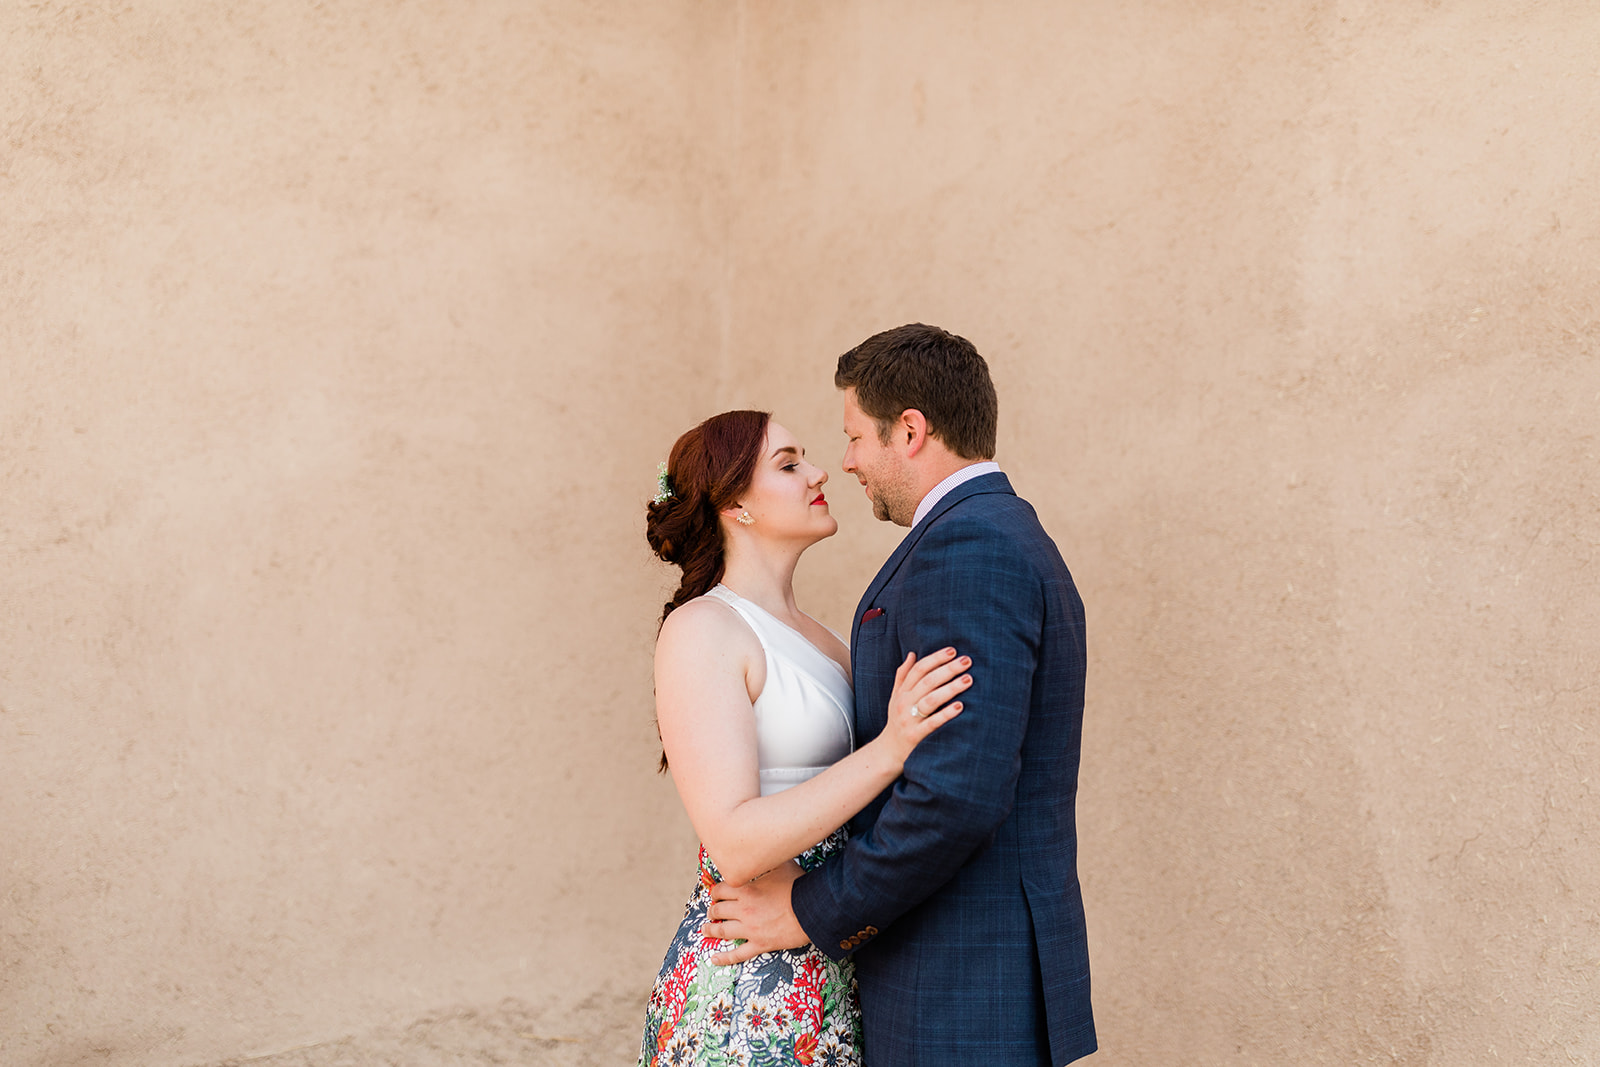 Bride and Groom portraits in front of iconic Taos New Mexico architecture